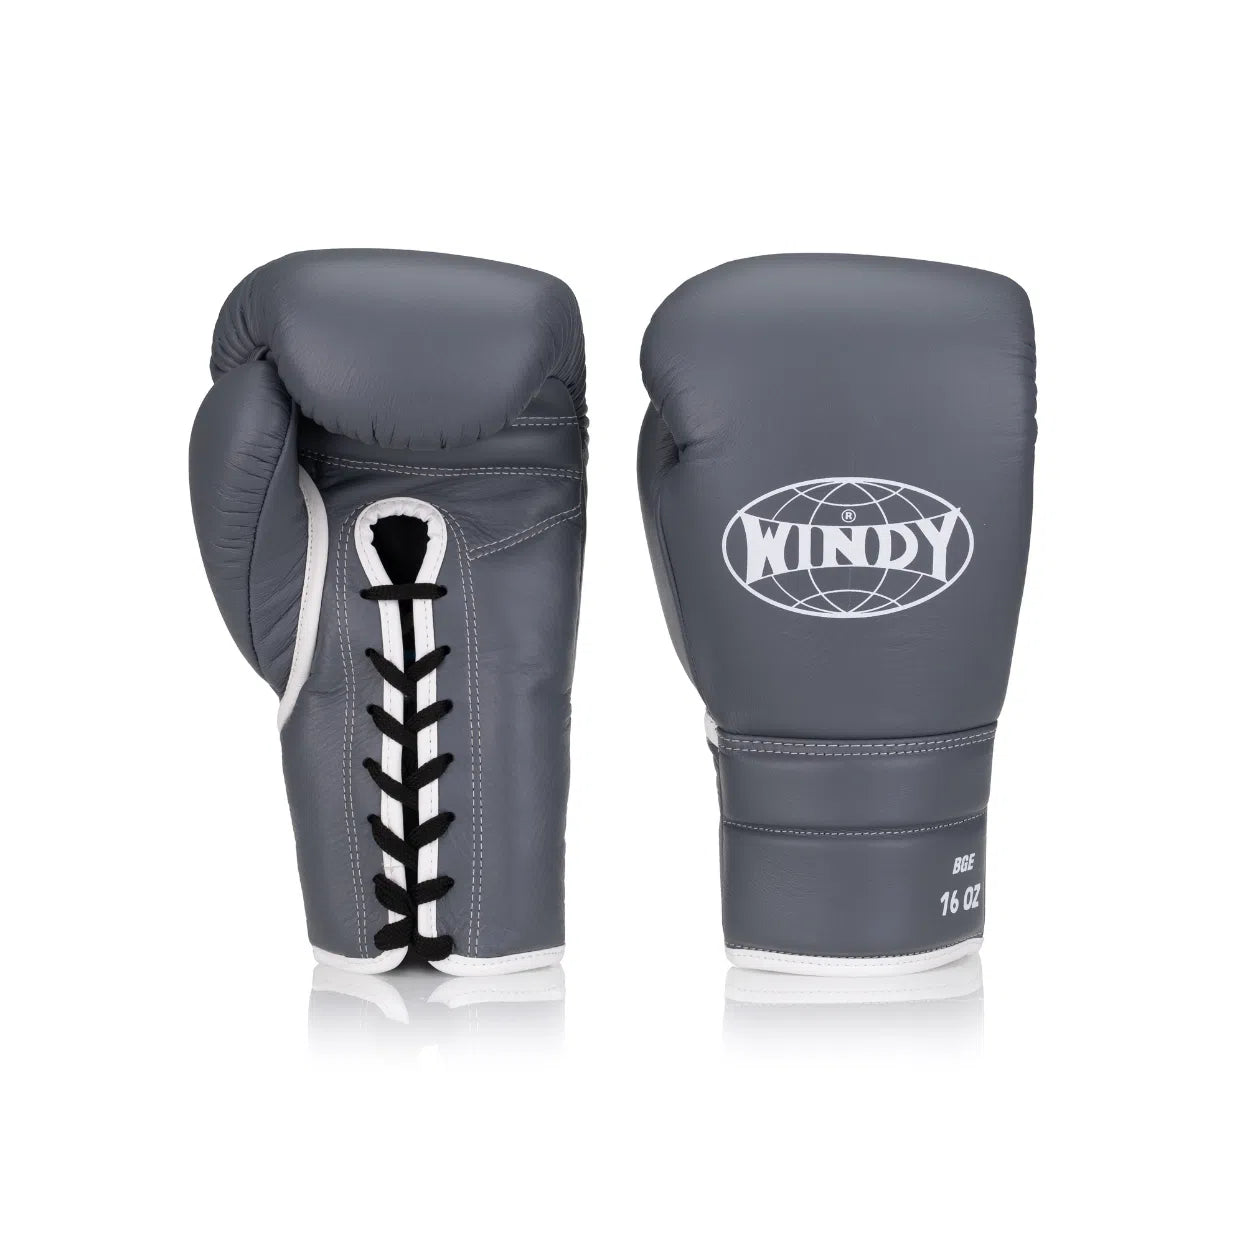 Elite Series Lace-up Boxing Glove - Grey/White